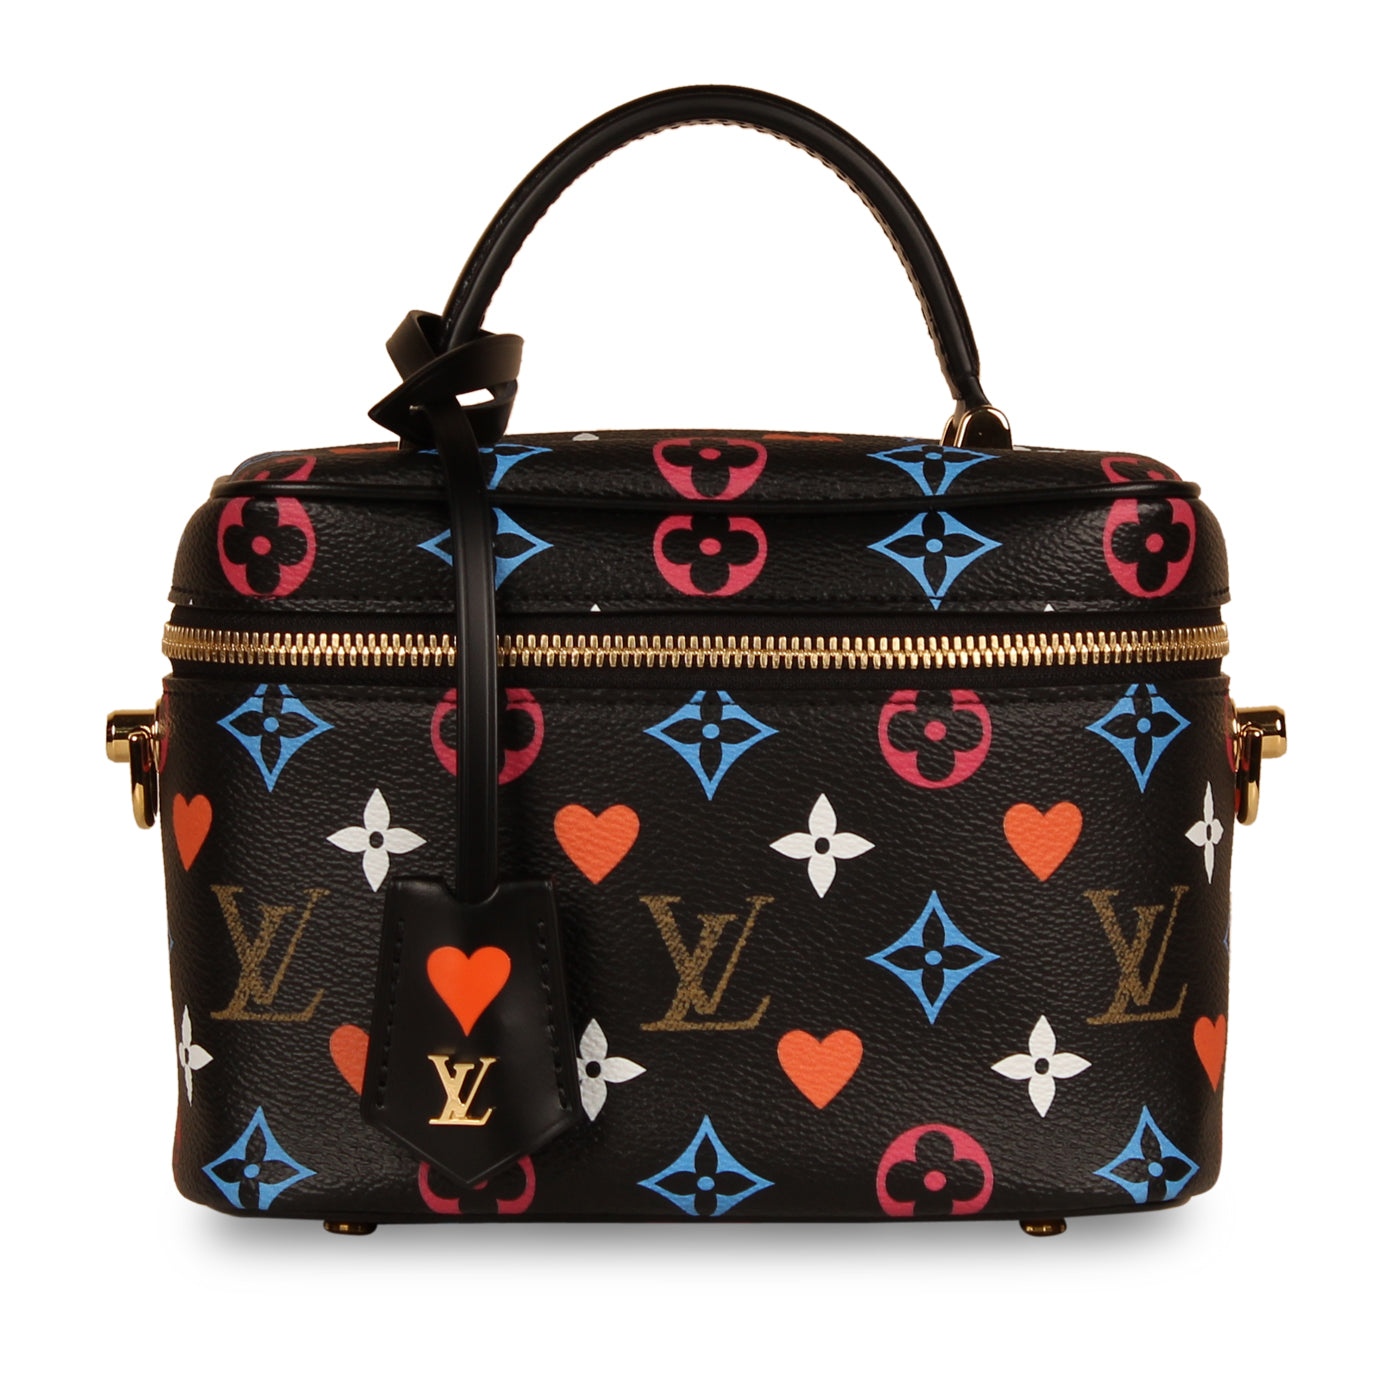 LOUIS VUITTON PRESENTS 'GAME ON